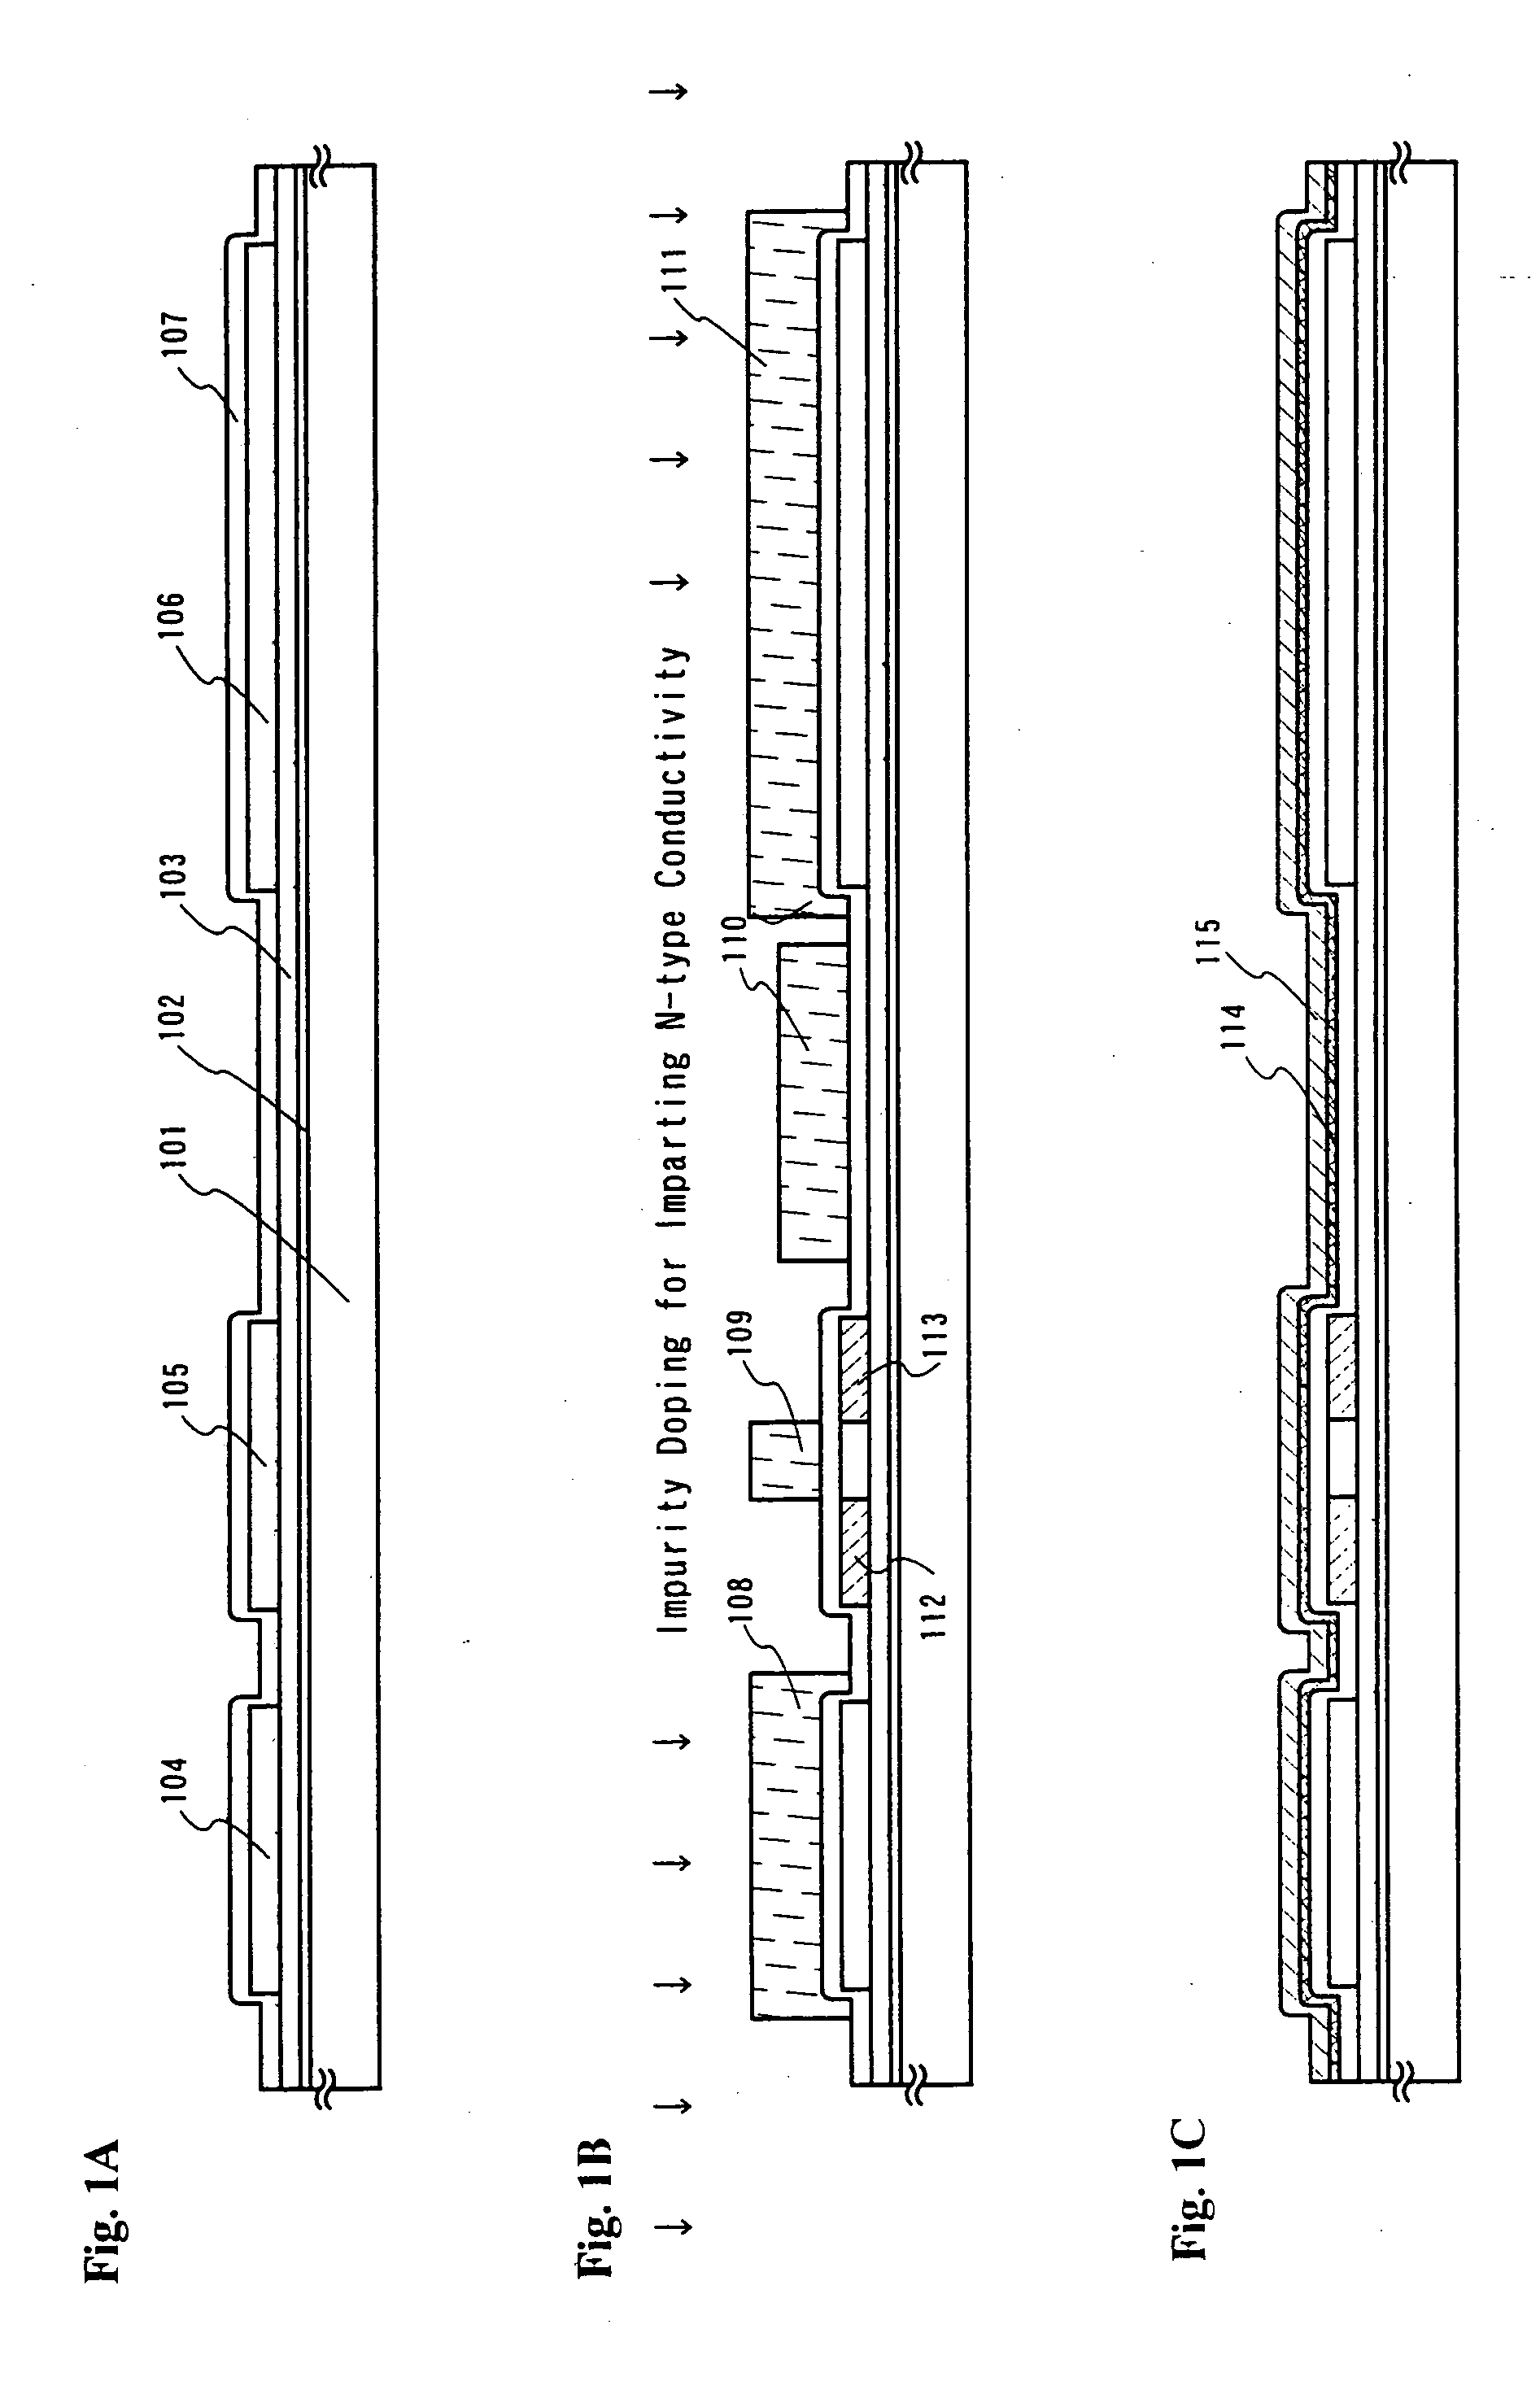 Semiconductor device and method of manufacturing therefor